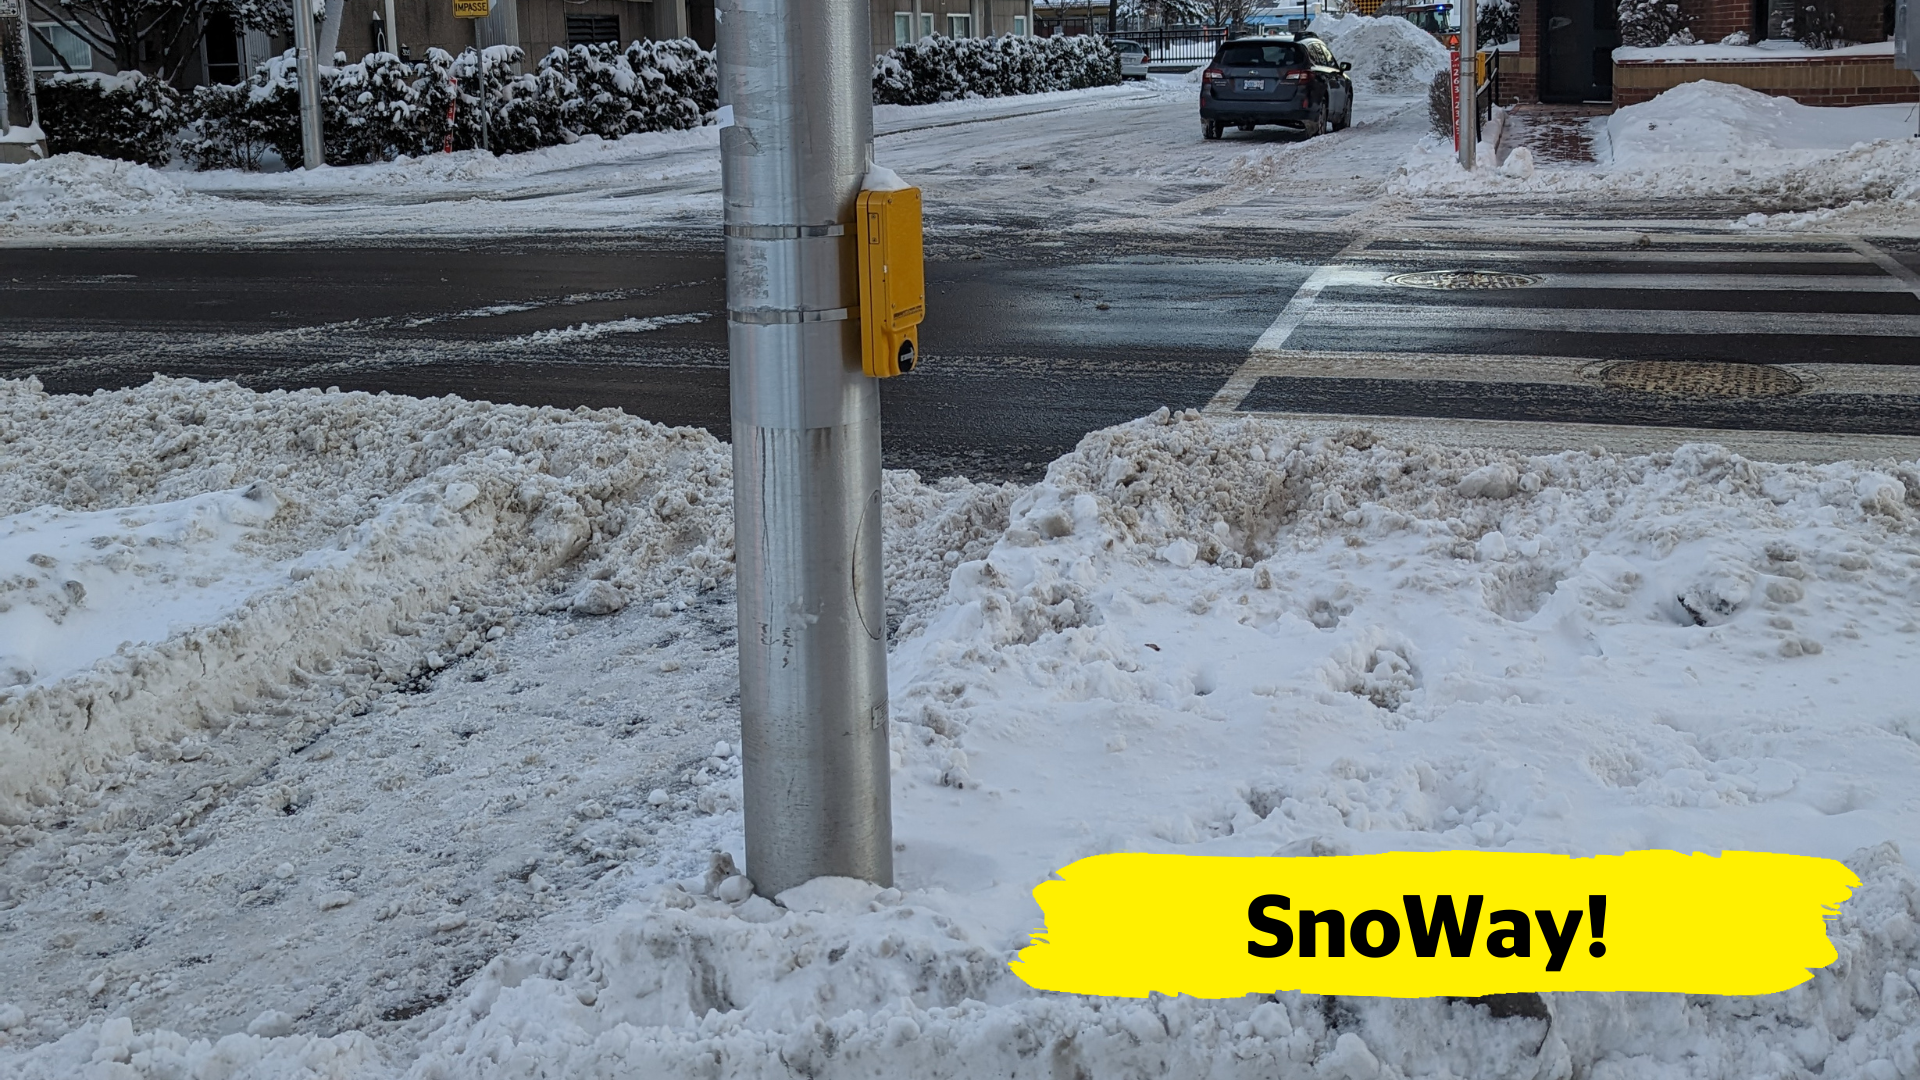 A pedestrian crosswalk is covered in snow and obstructing both the path of travel and a pole that houses the pedestrian crossing push-button.  In the bottom right-hand corner of the image, there is a yellow banner overlay with the text “SnoWay!”